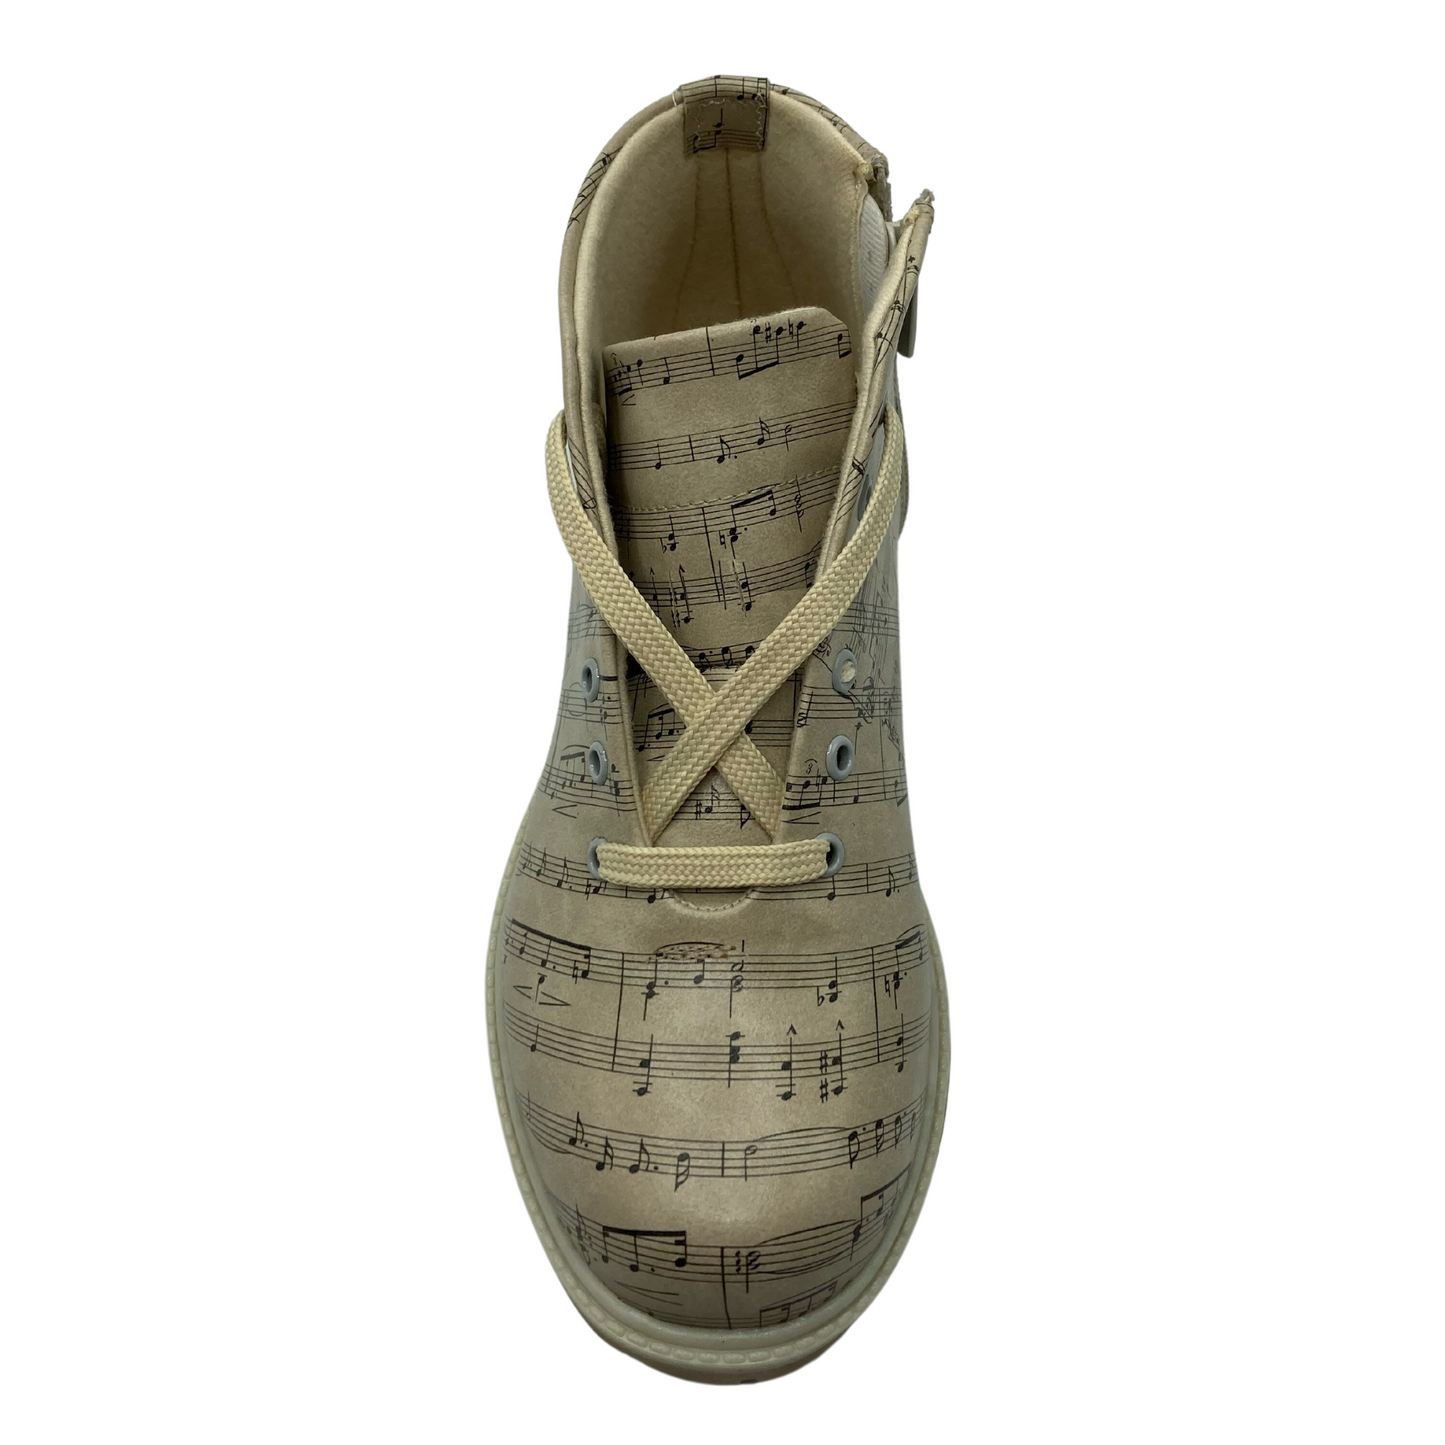 Top view of vegan leather short boot with sheet music pattern on upper and cream coloured laces